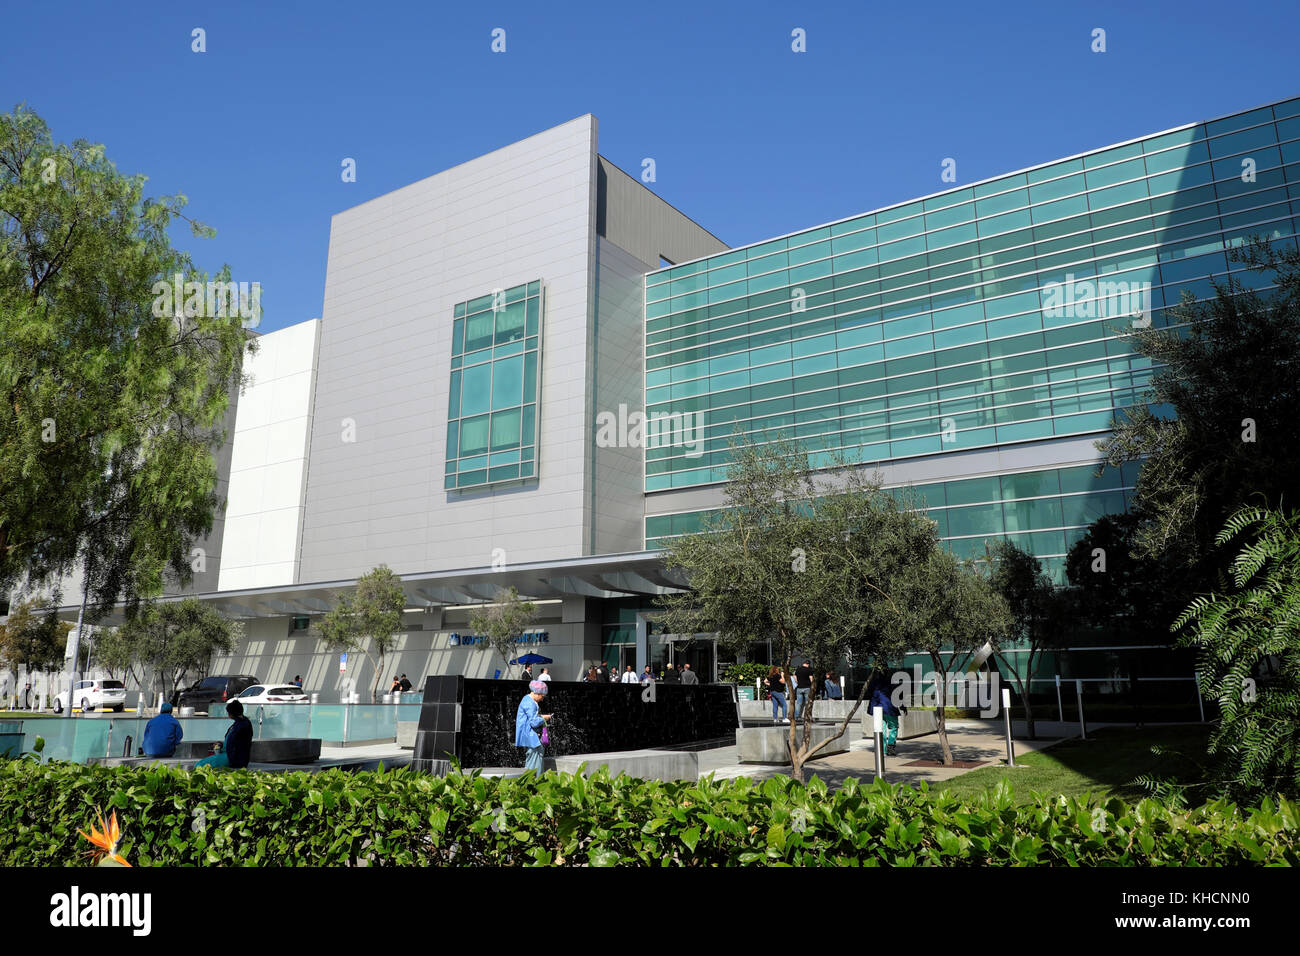 Exterior view of American Kaiser Permanente Medical Center building on Sunset Boulevard in Los Angeles, California USA    KATHY DEWITT Stock Photo